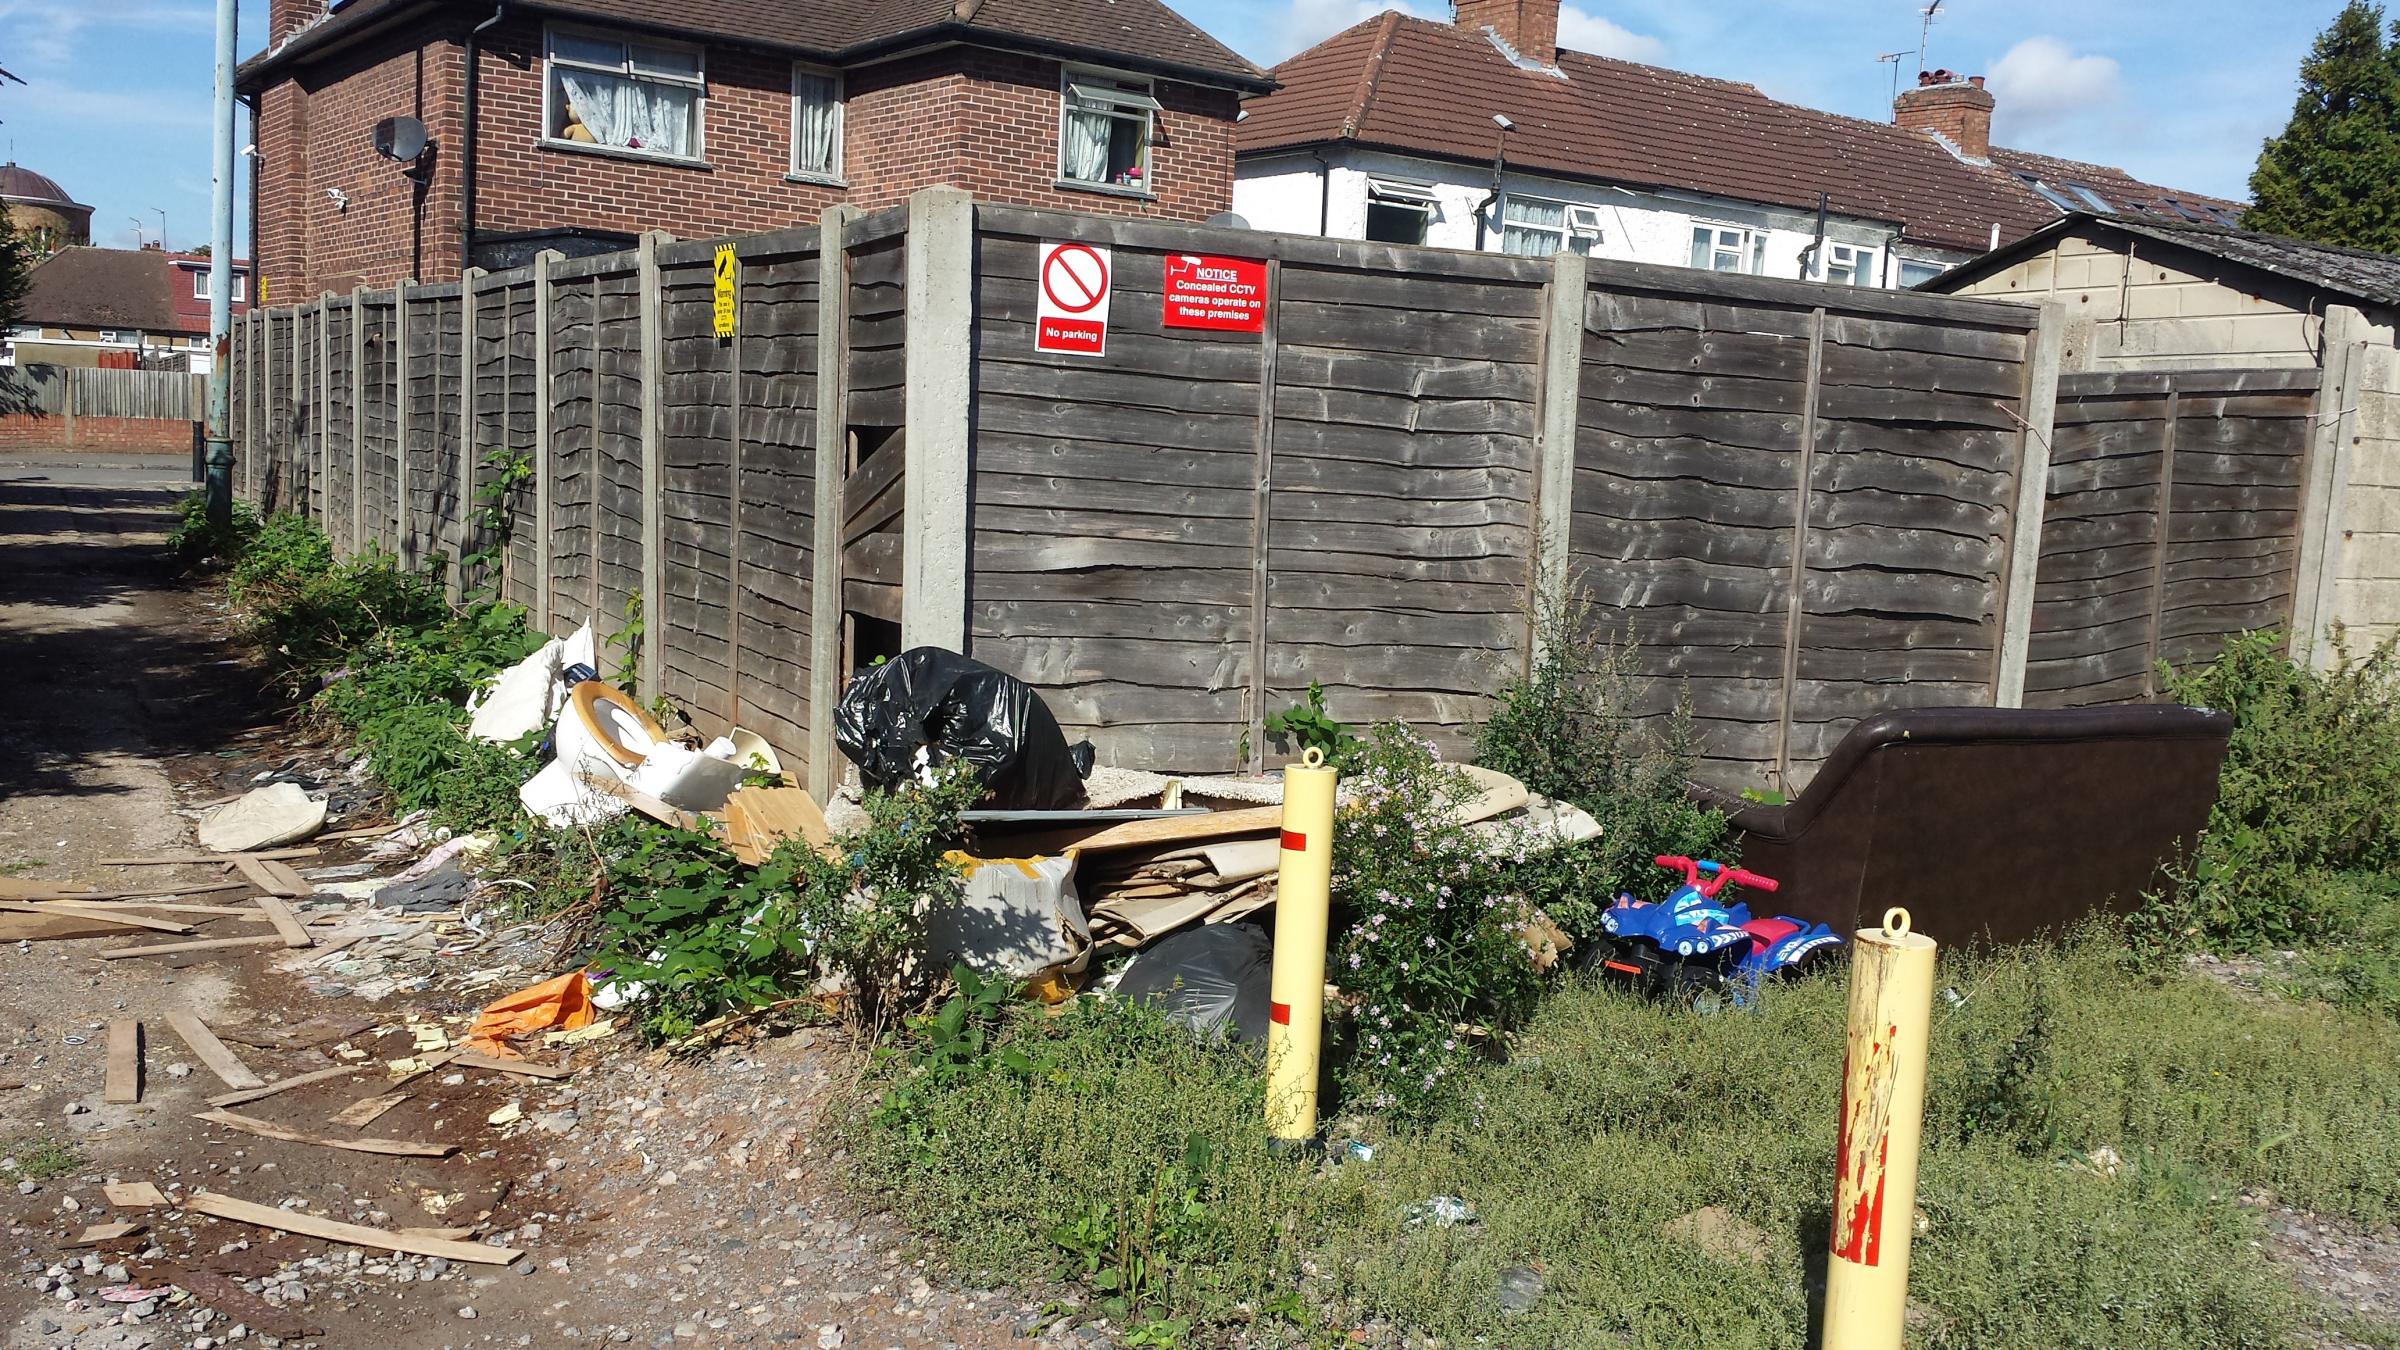 'Why is there so much mess around our house, why did we move here?’ : Father's anger after waste is dumped outside his home